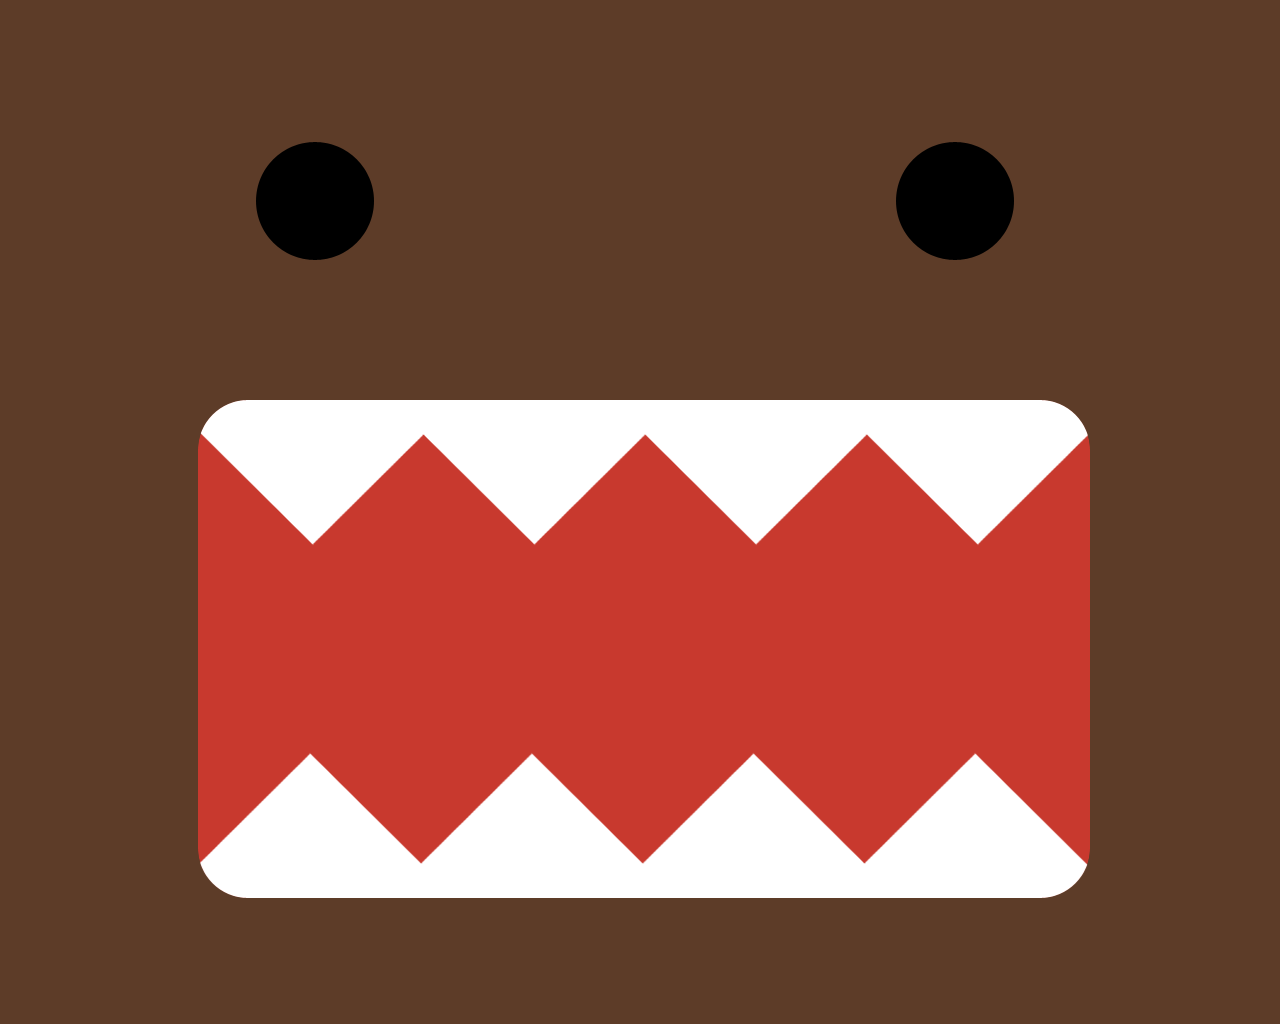 🔥 Download Domo Kun Wallpaper With Talking A Lizard By Asnyder Domo